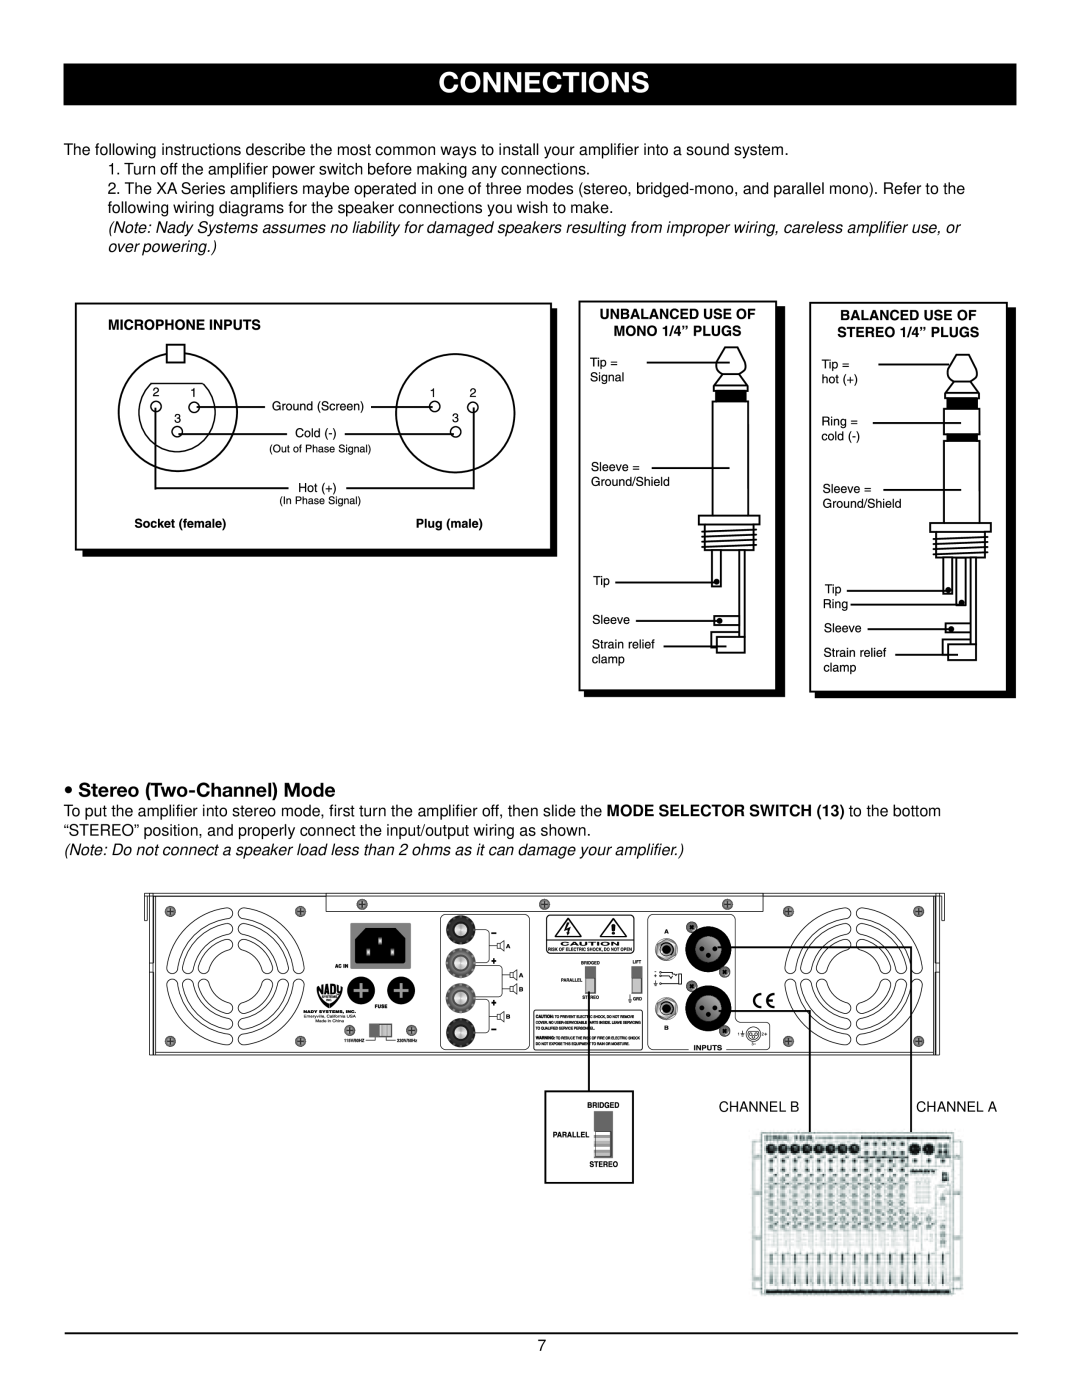 Nady Systems SPA 850 owner manual Connections, Stereo Two-ChannelMode 